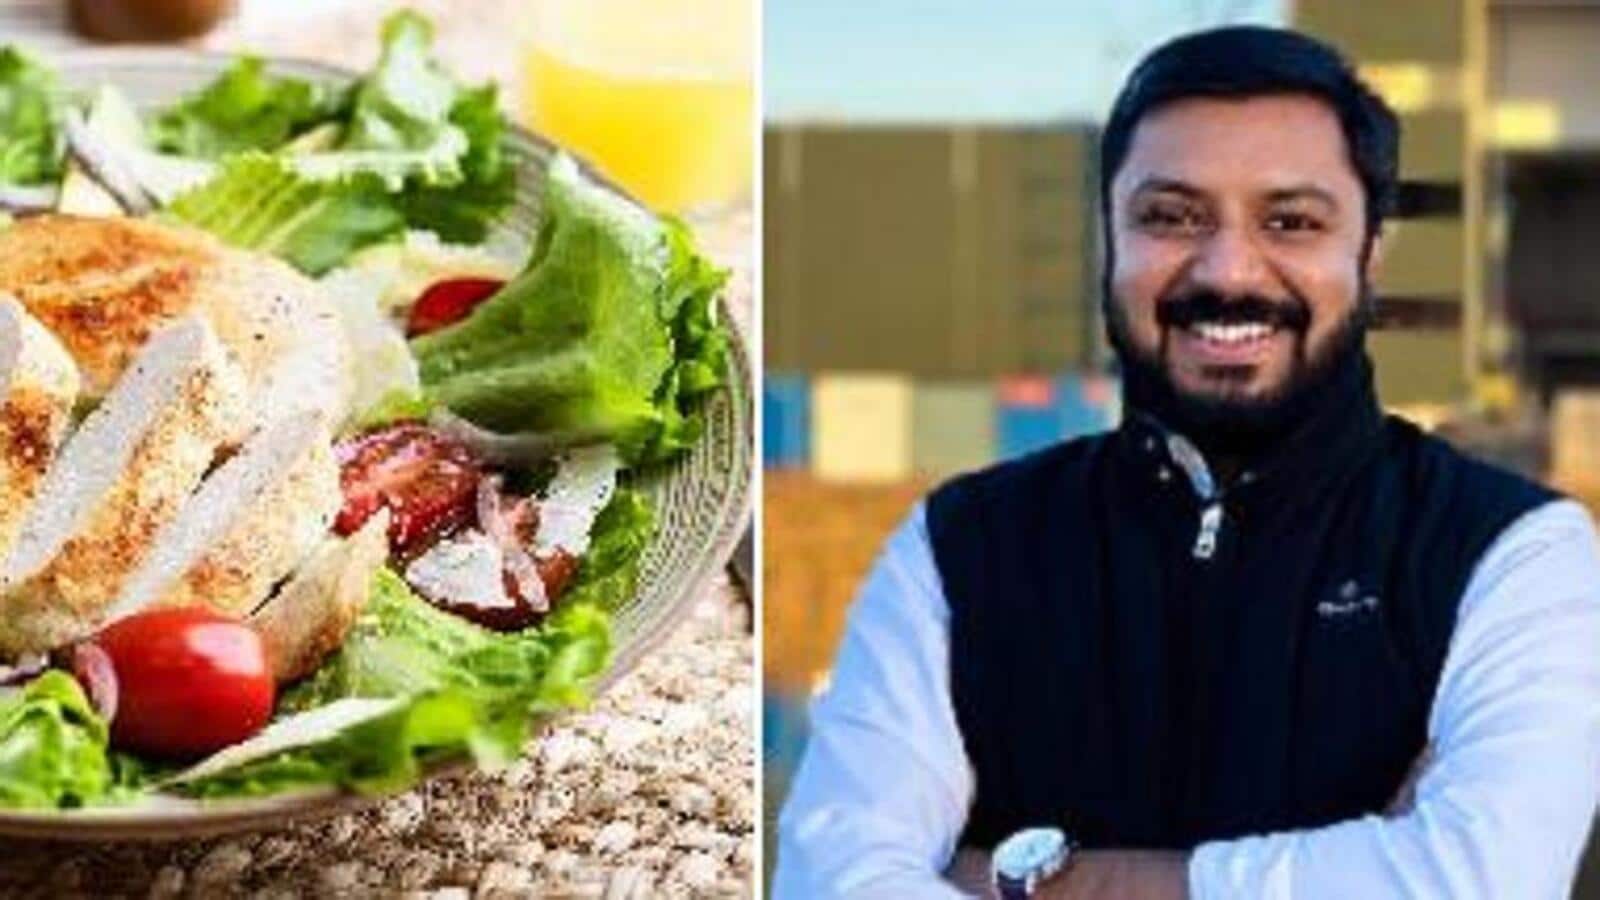 Meatless meat: Swedish start-up owned by Keralite tickles palette